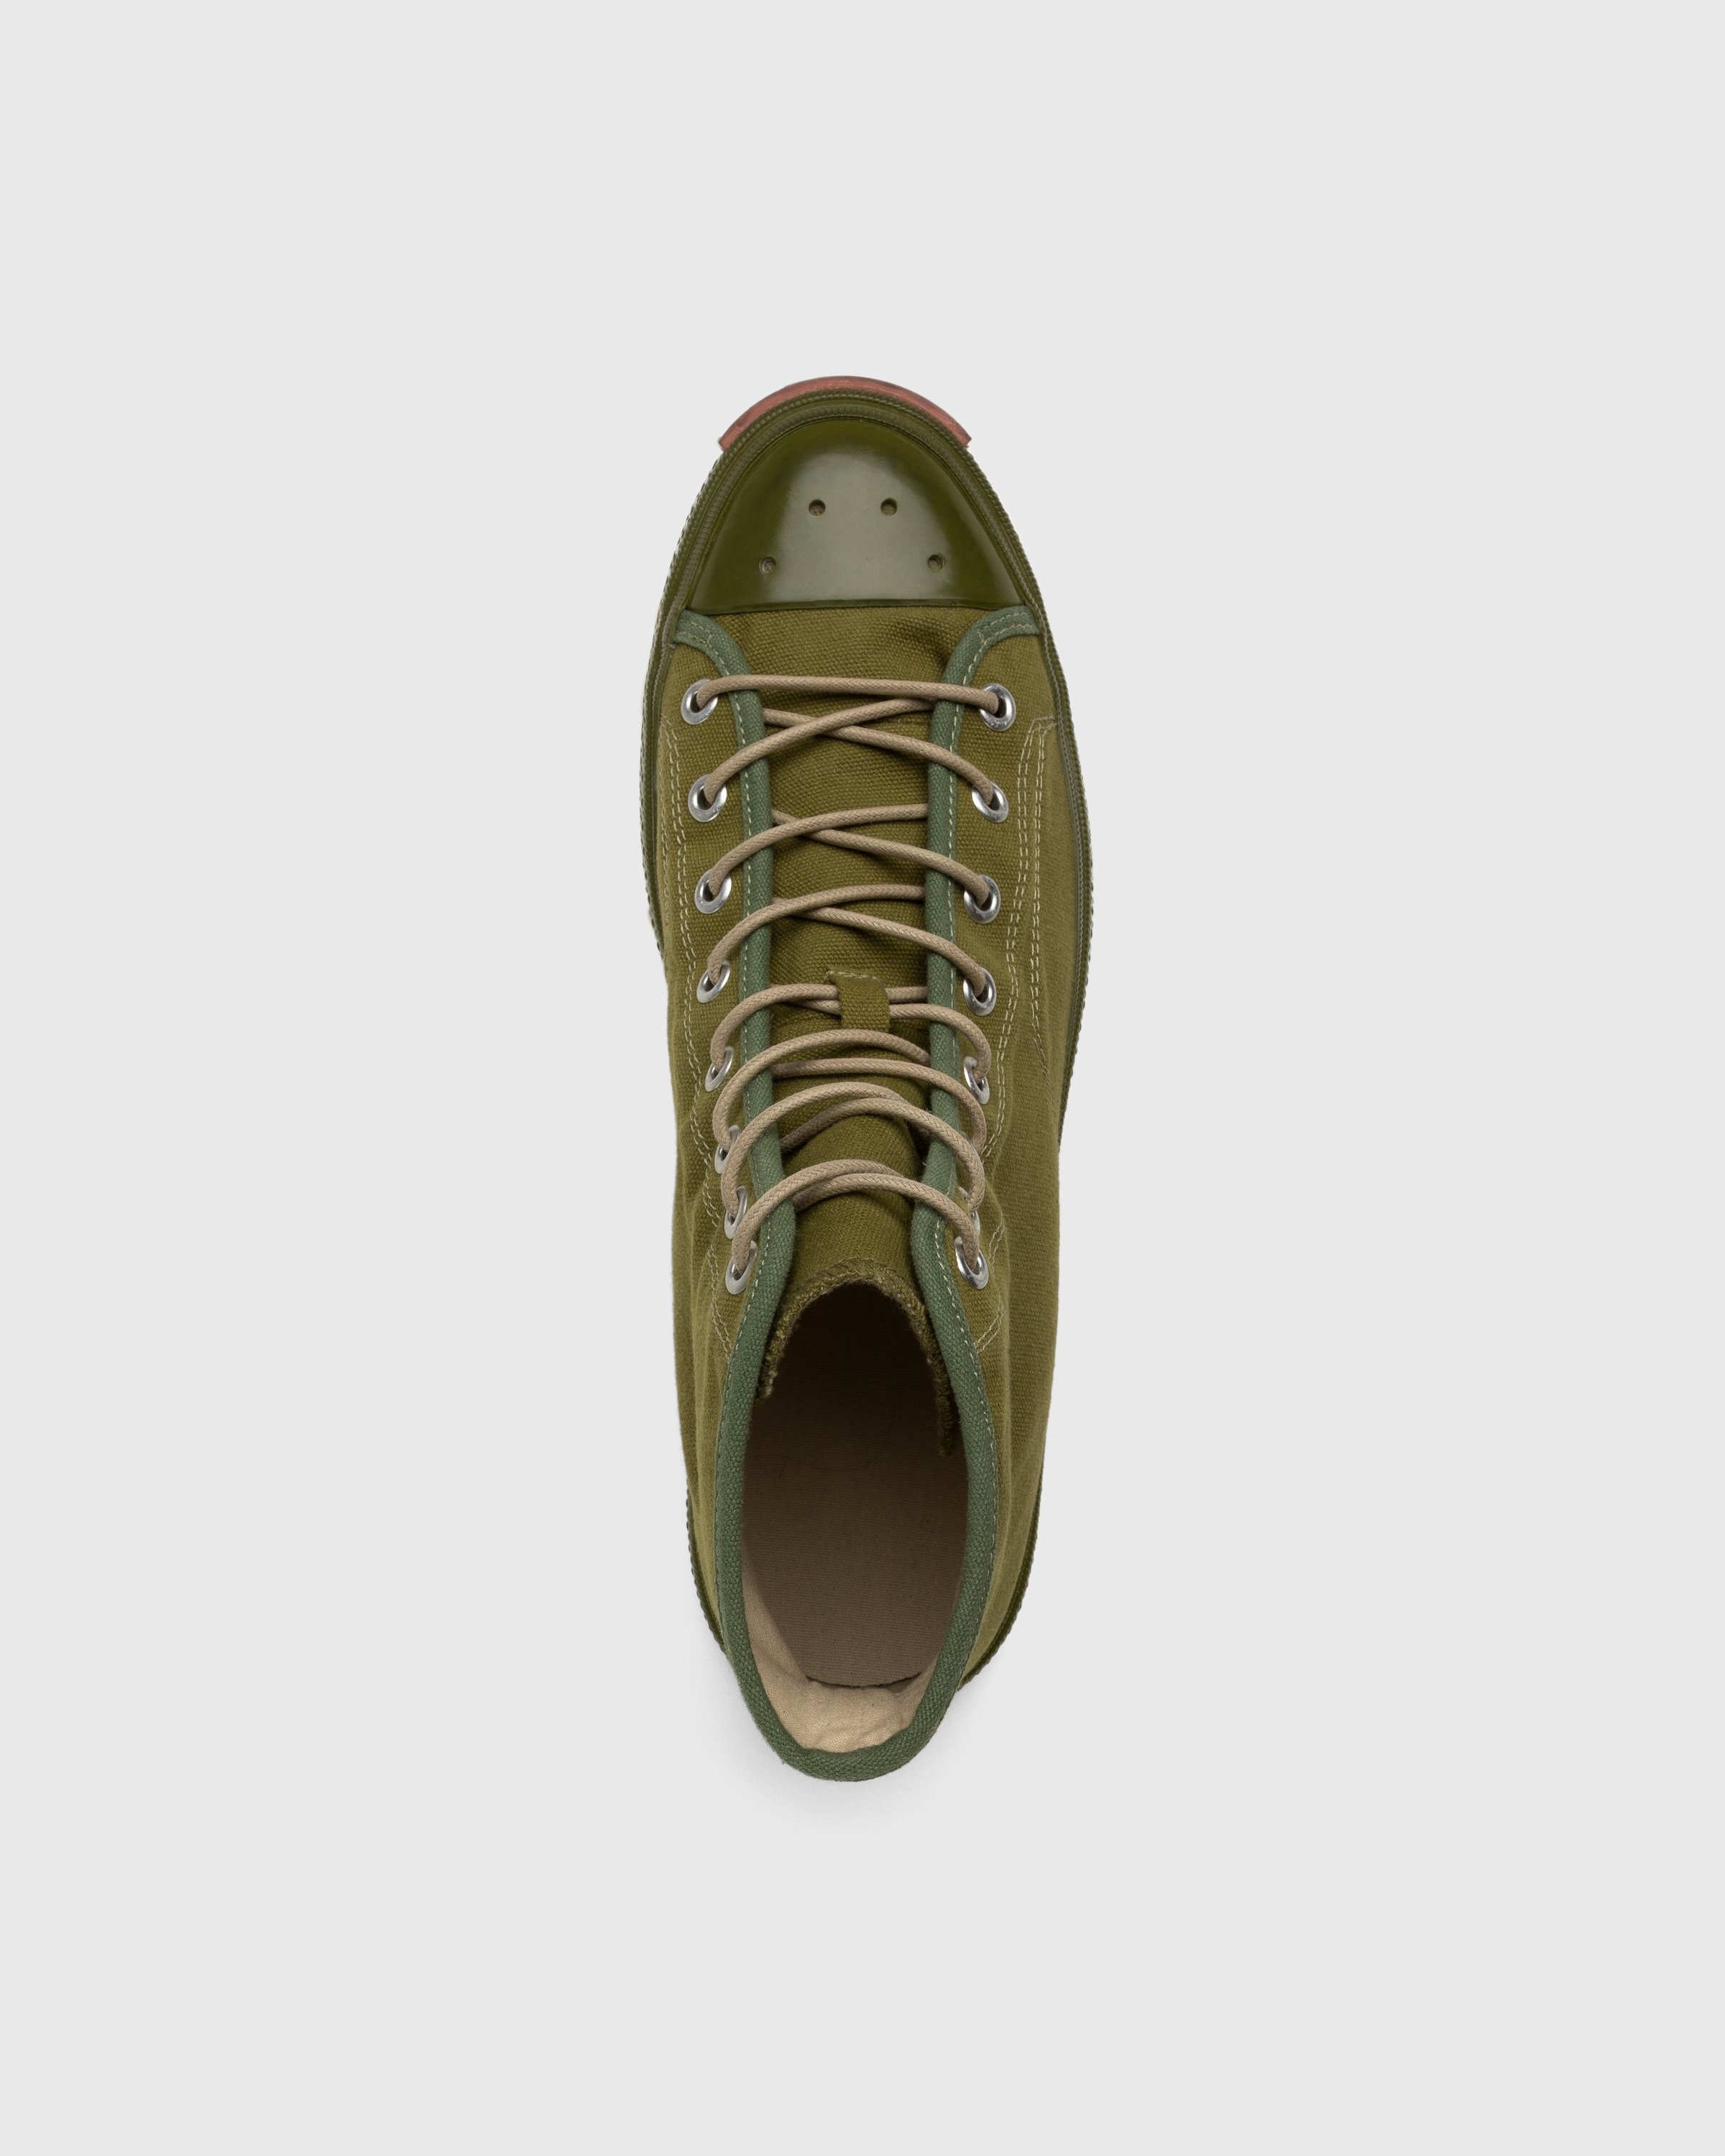 Acne Studios – Ballow High-Top Sneakers Olive Green - High Top Sneakers - Green - Image 5